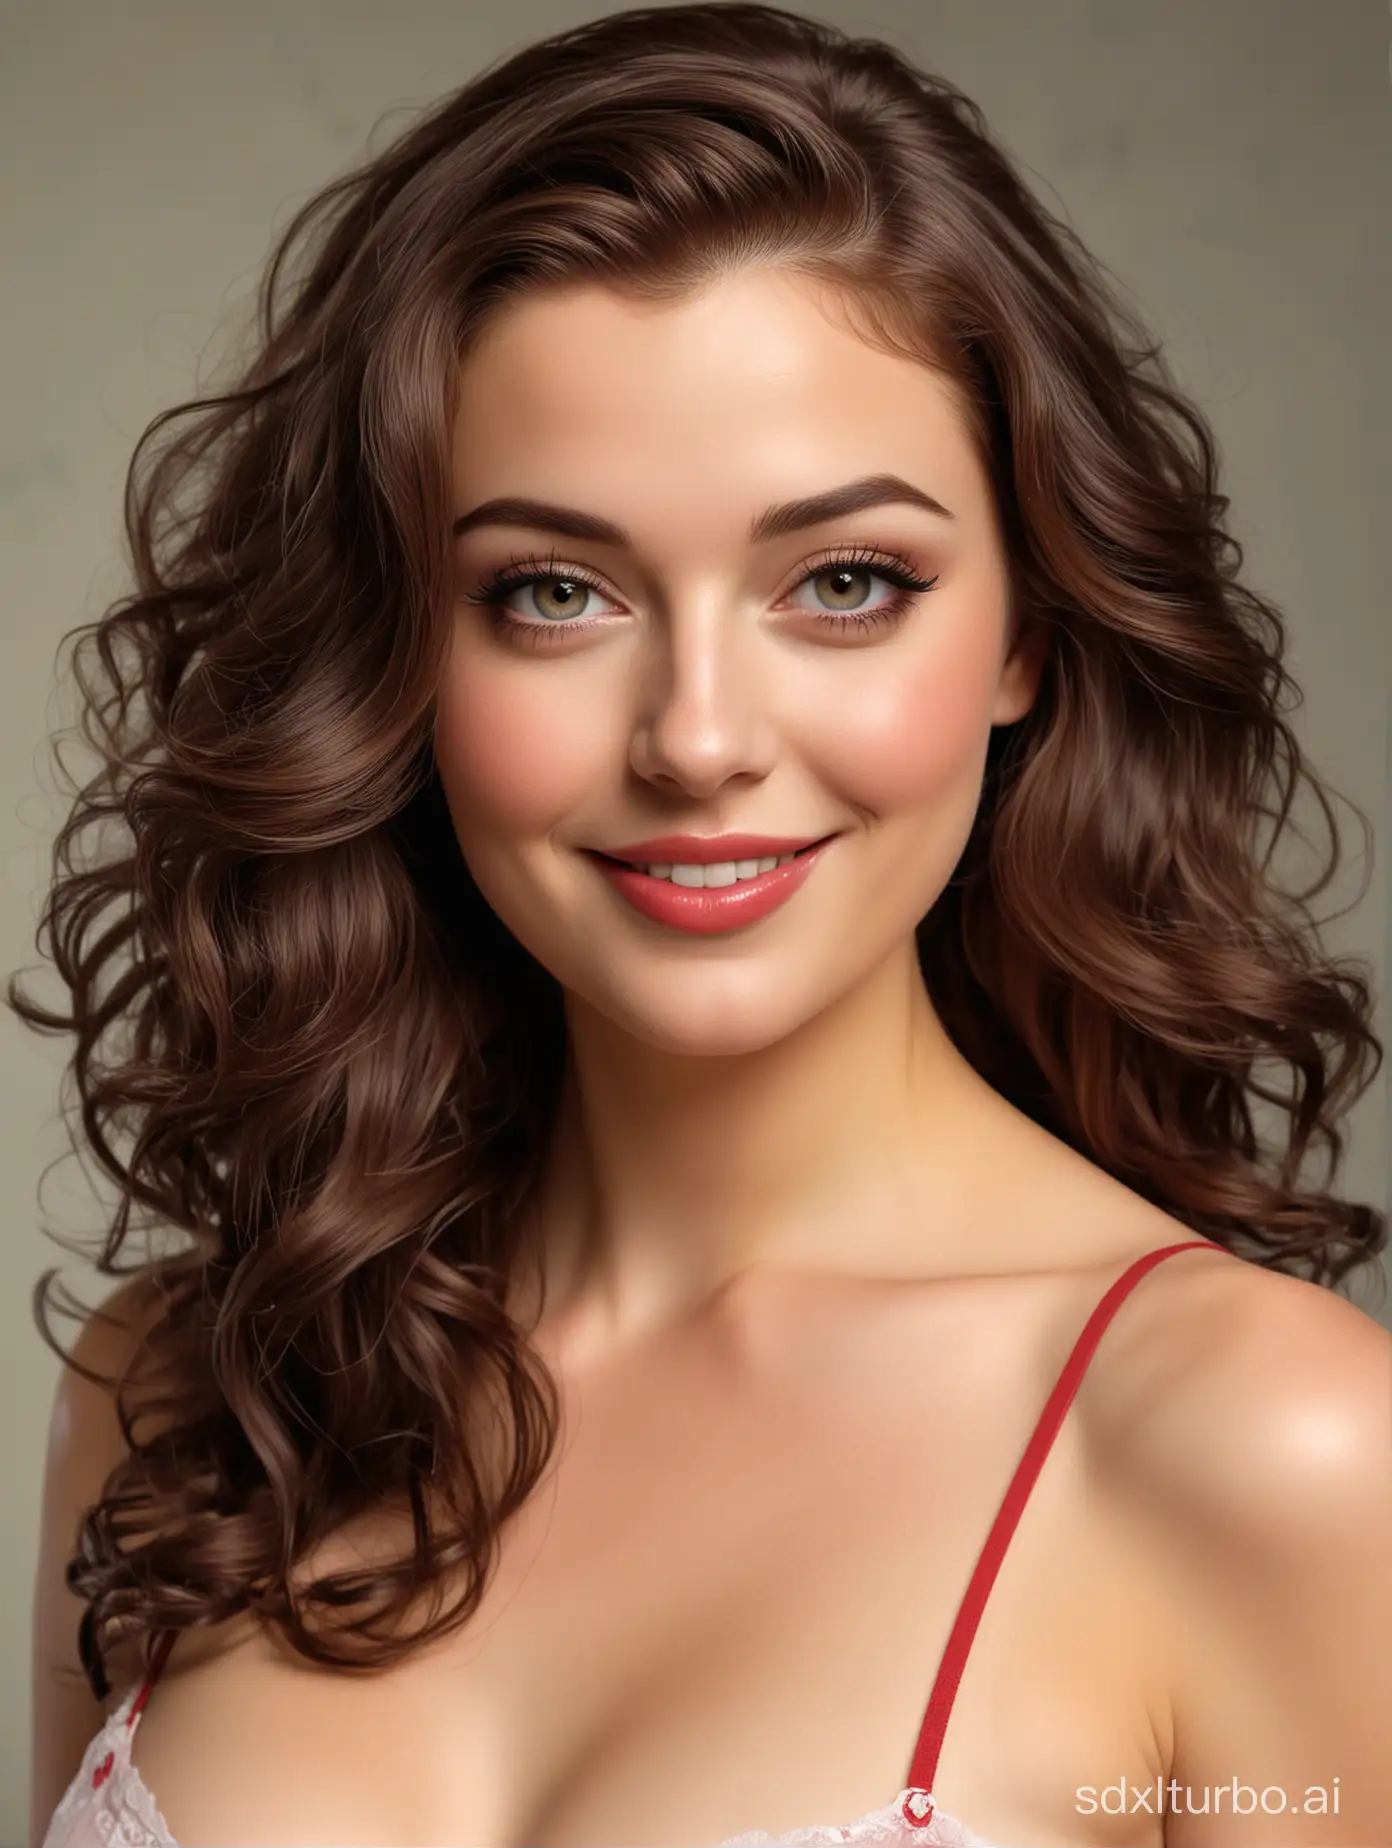 Sensual-PinUp-Portrait-of-a-Woman-with-Dreamy-Eyes-and-Long-Wavy-Hair